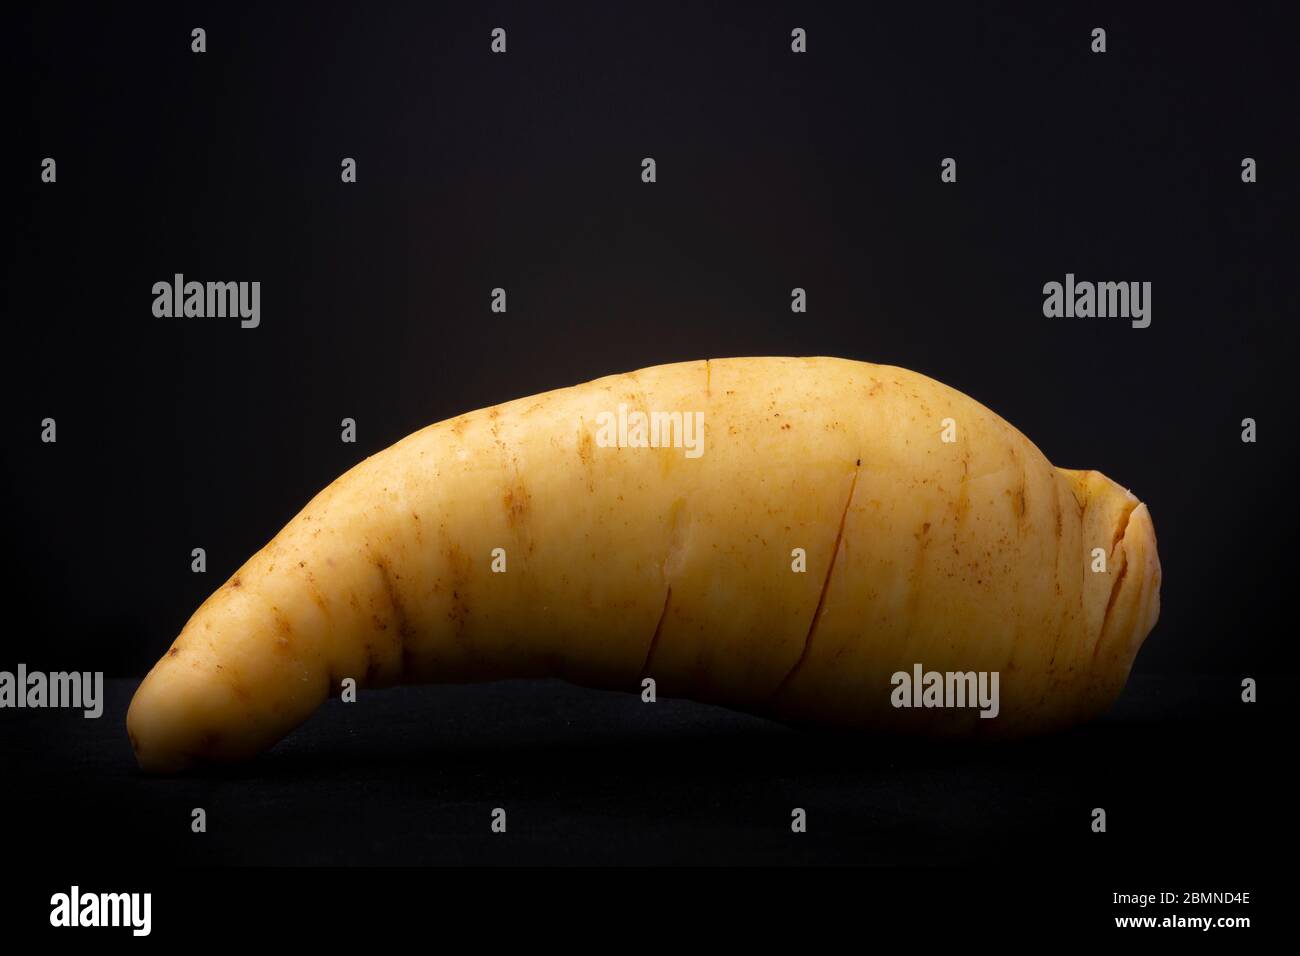 Texture and detail of a large yellow sweet potato. Studio low key food still life contrasted against a dark background. Stock Photo